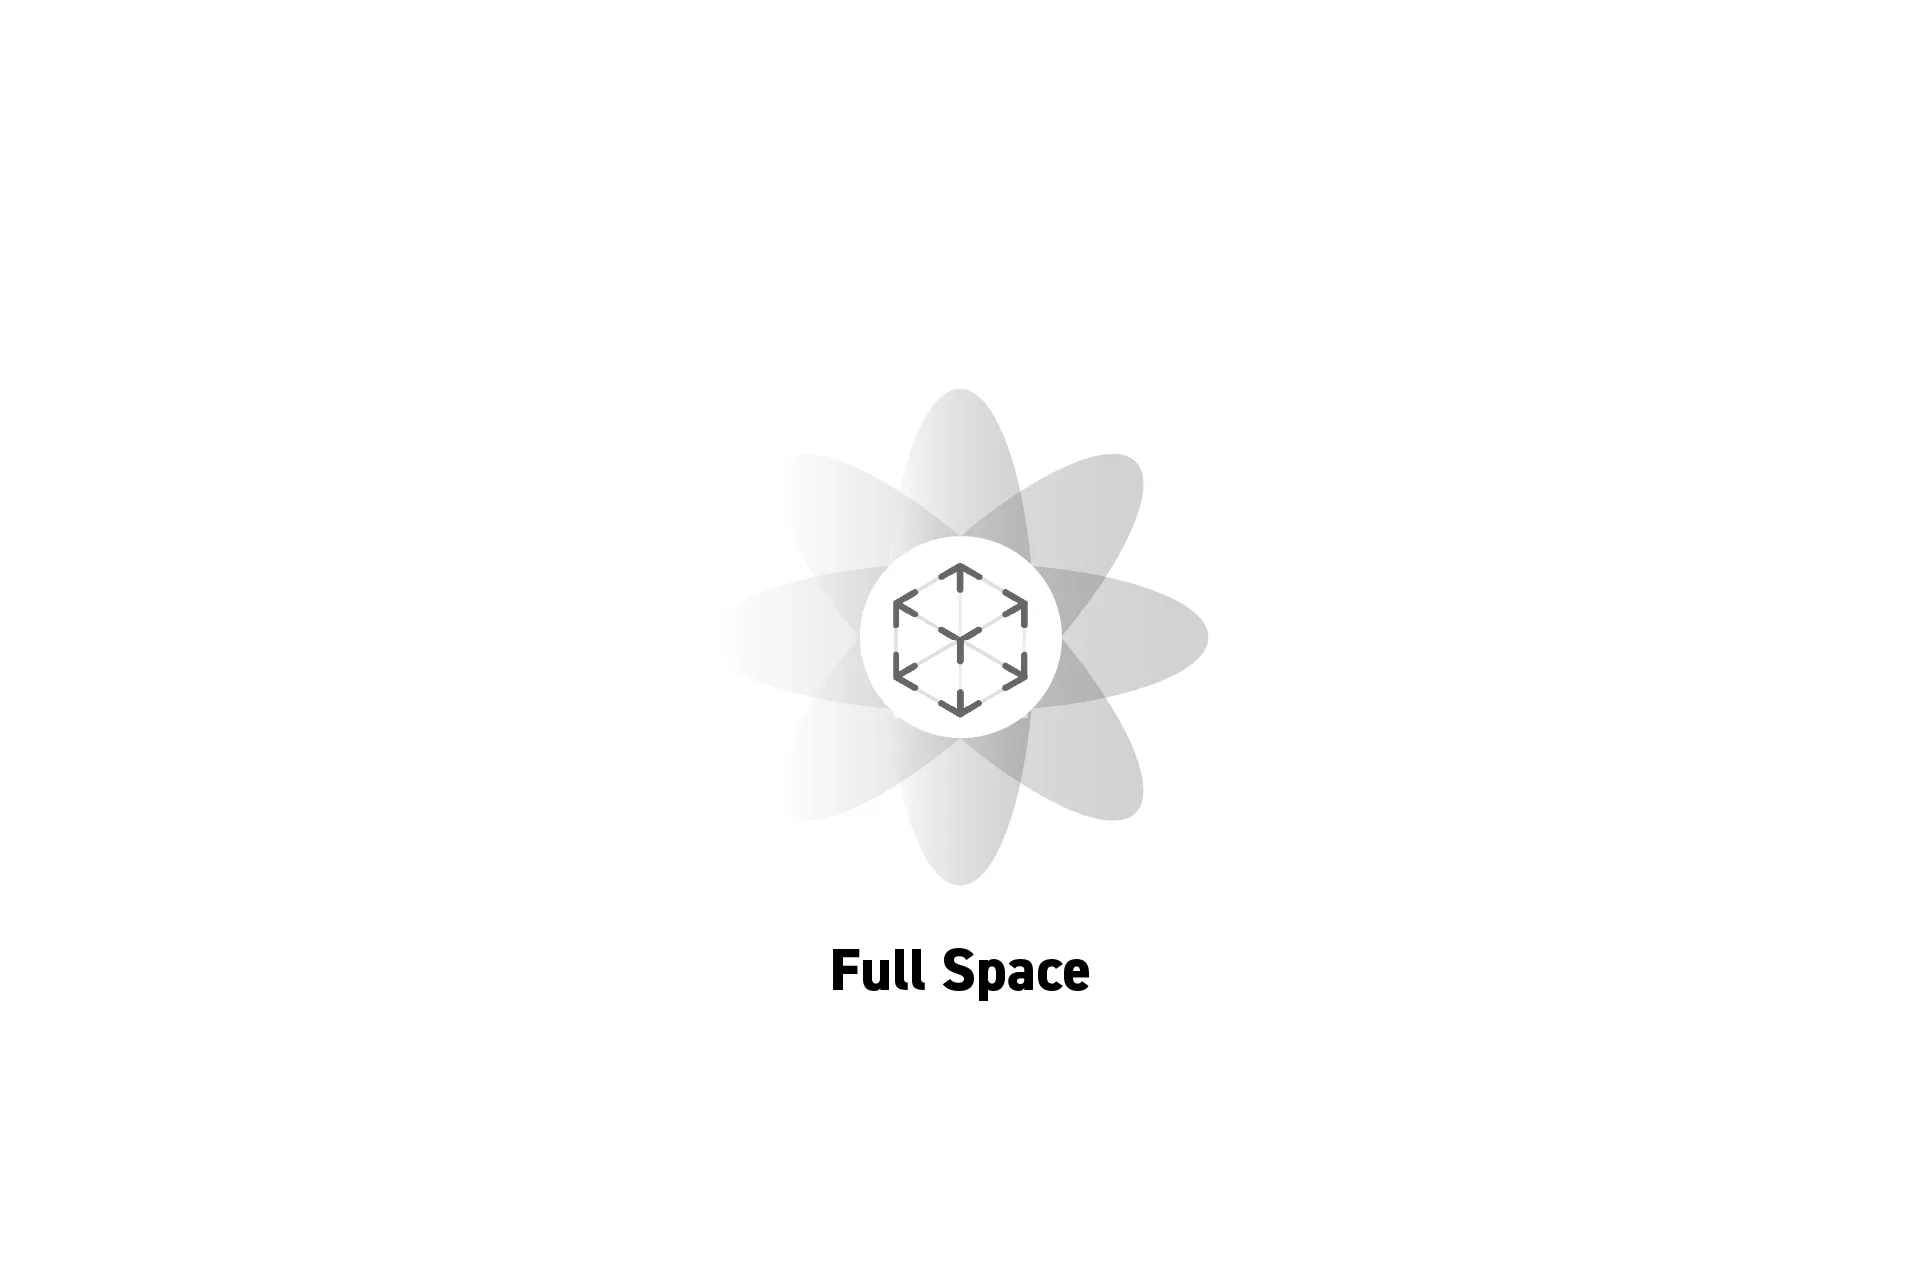 A flower that represents spatial computing with the text "Full Space" beneath it.<br />